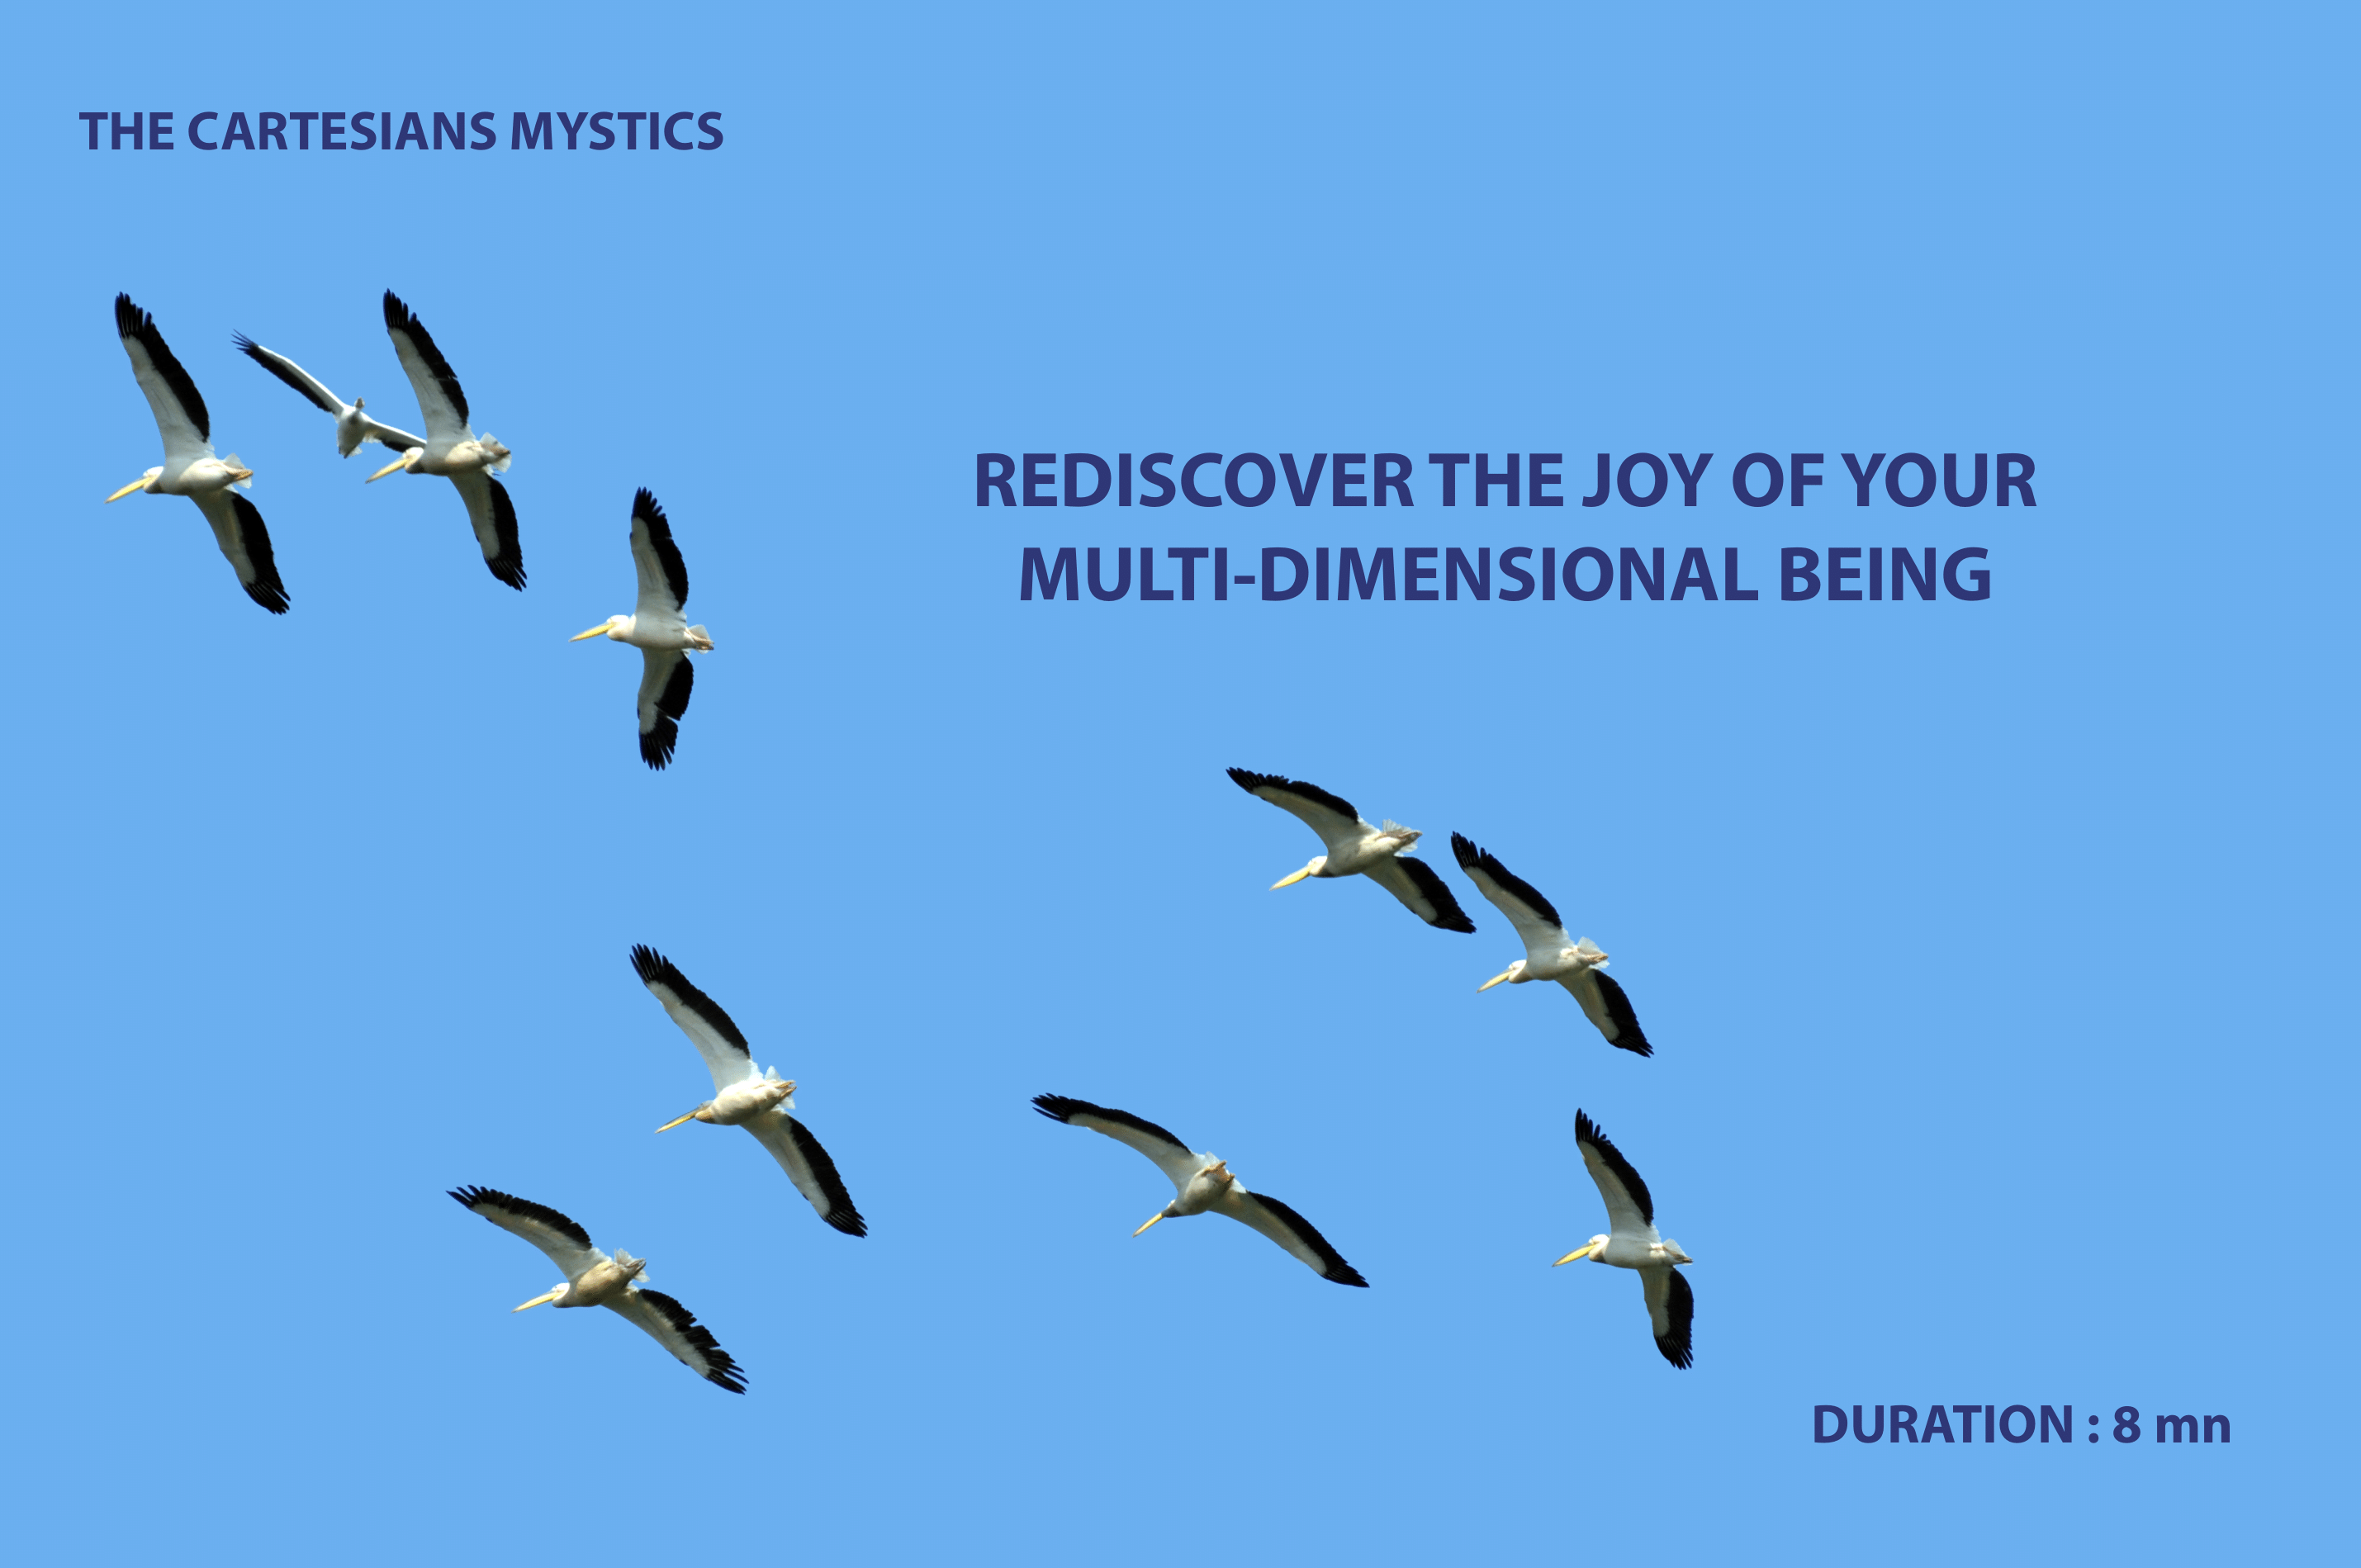 MEDITATION N ° 11: REDISCOVER THE JOY OF YOUR MULTI-DIMENSIONAL BEING